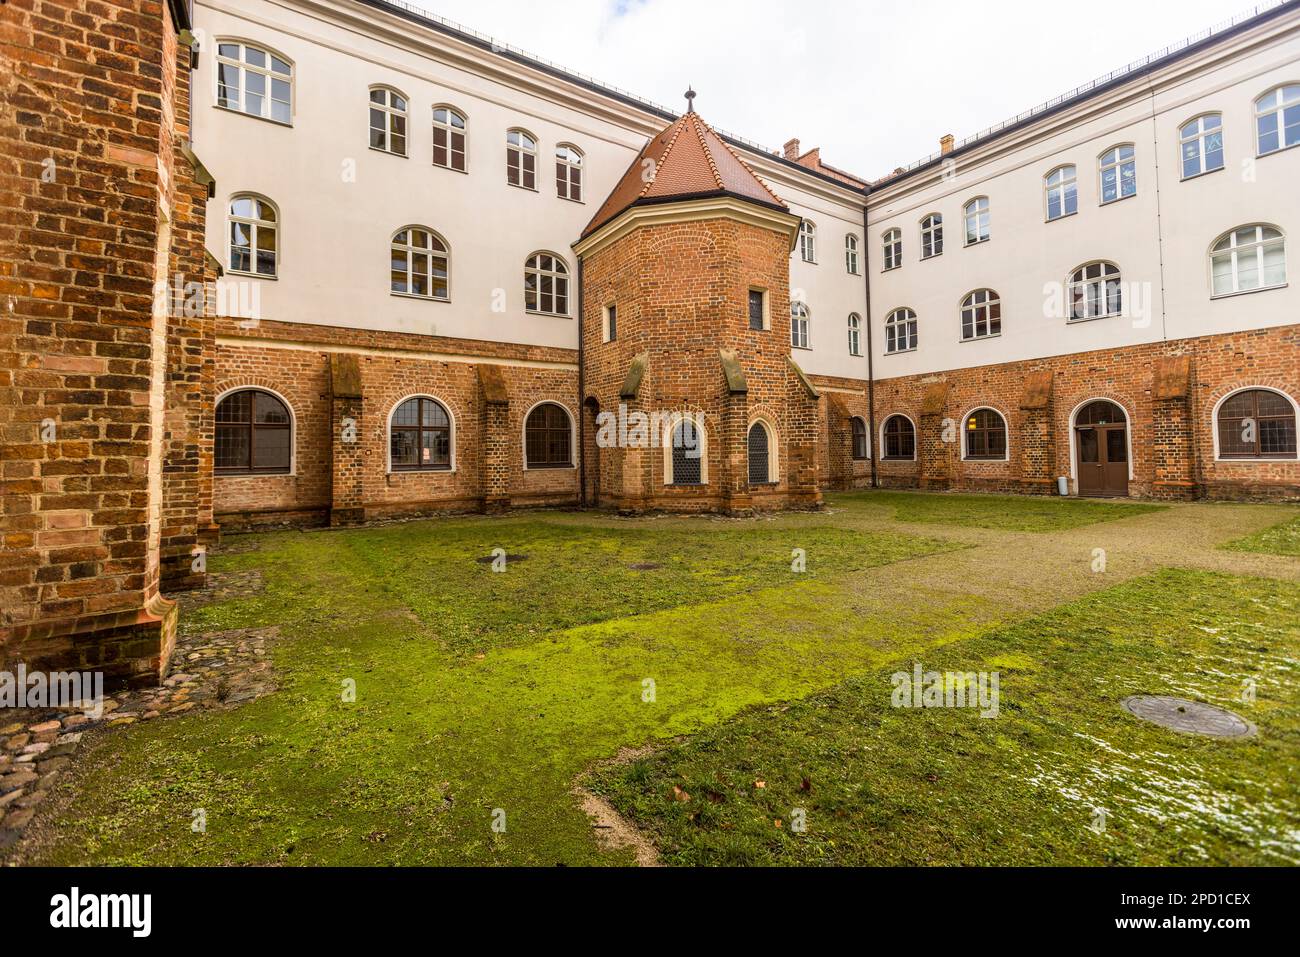 Neuzelle Baroque Monastery, Germany. Inner courtyard of the Neuzelle monastery complex. The brick of the cloister indicates its Gothic origin. The monastery was founded in 1268 by market count Heinrich von Meißen Stock Photo